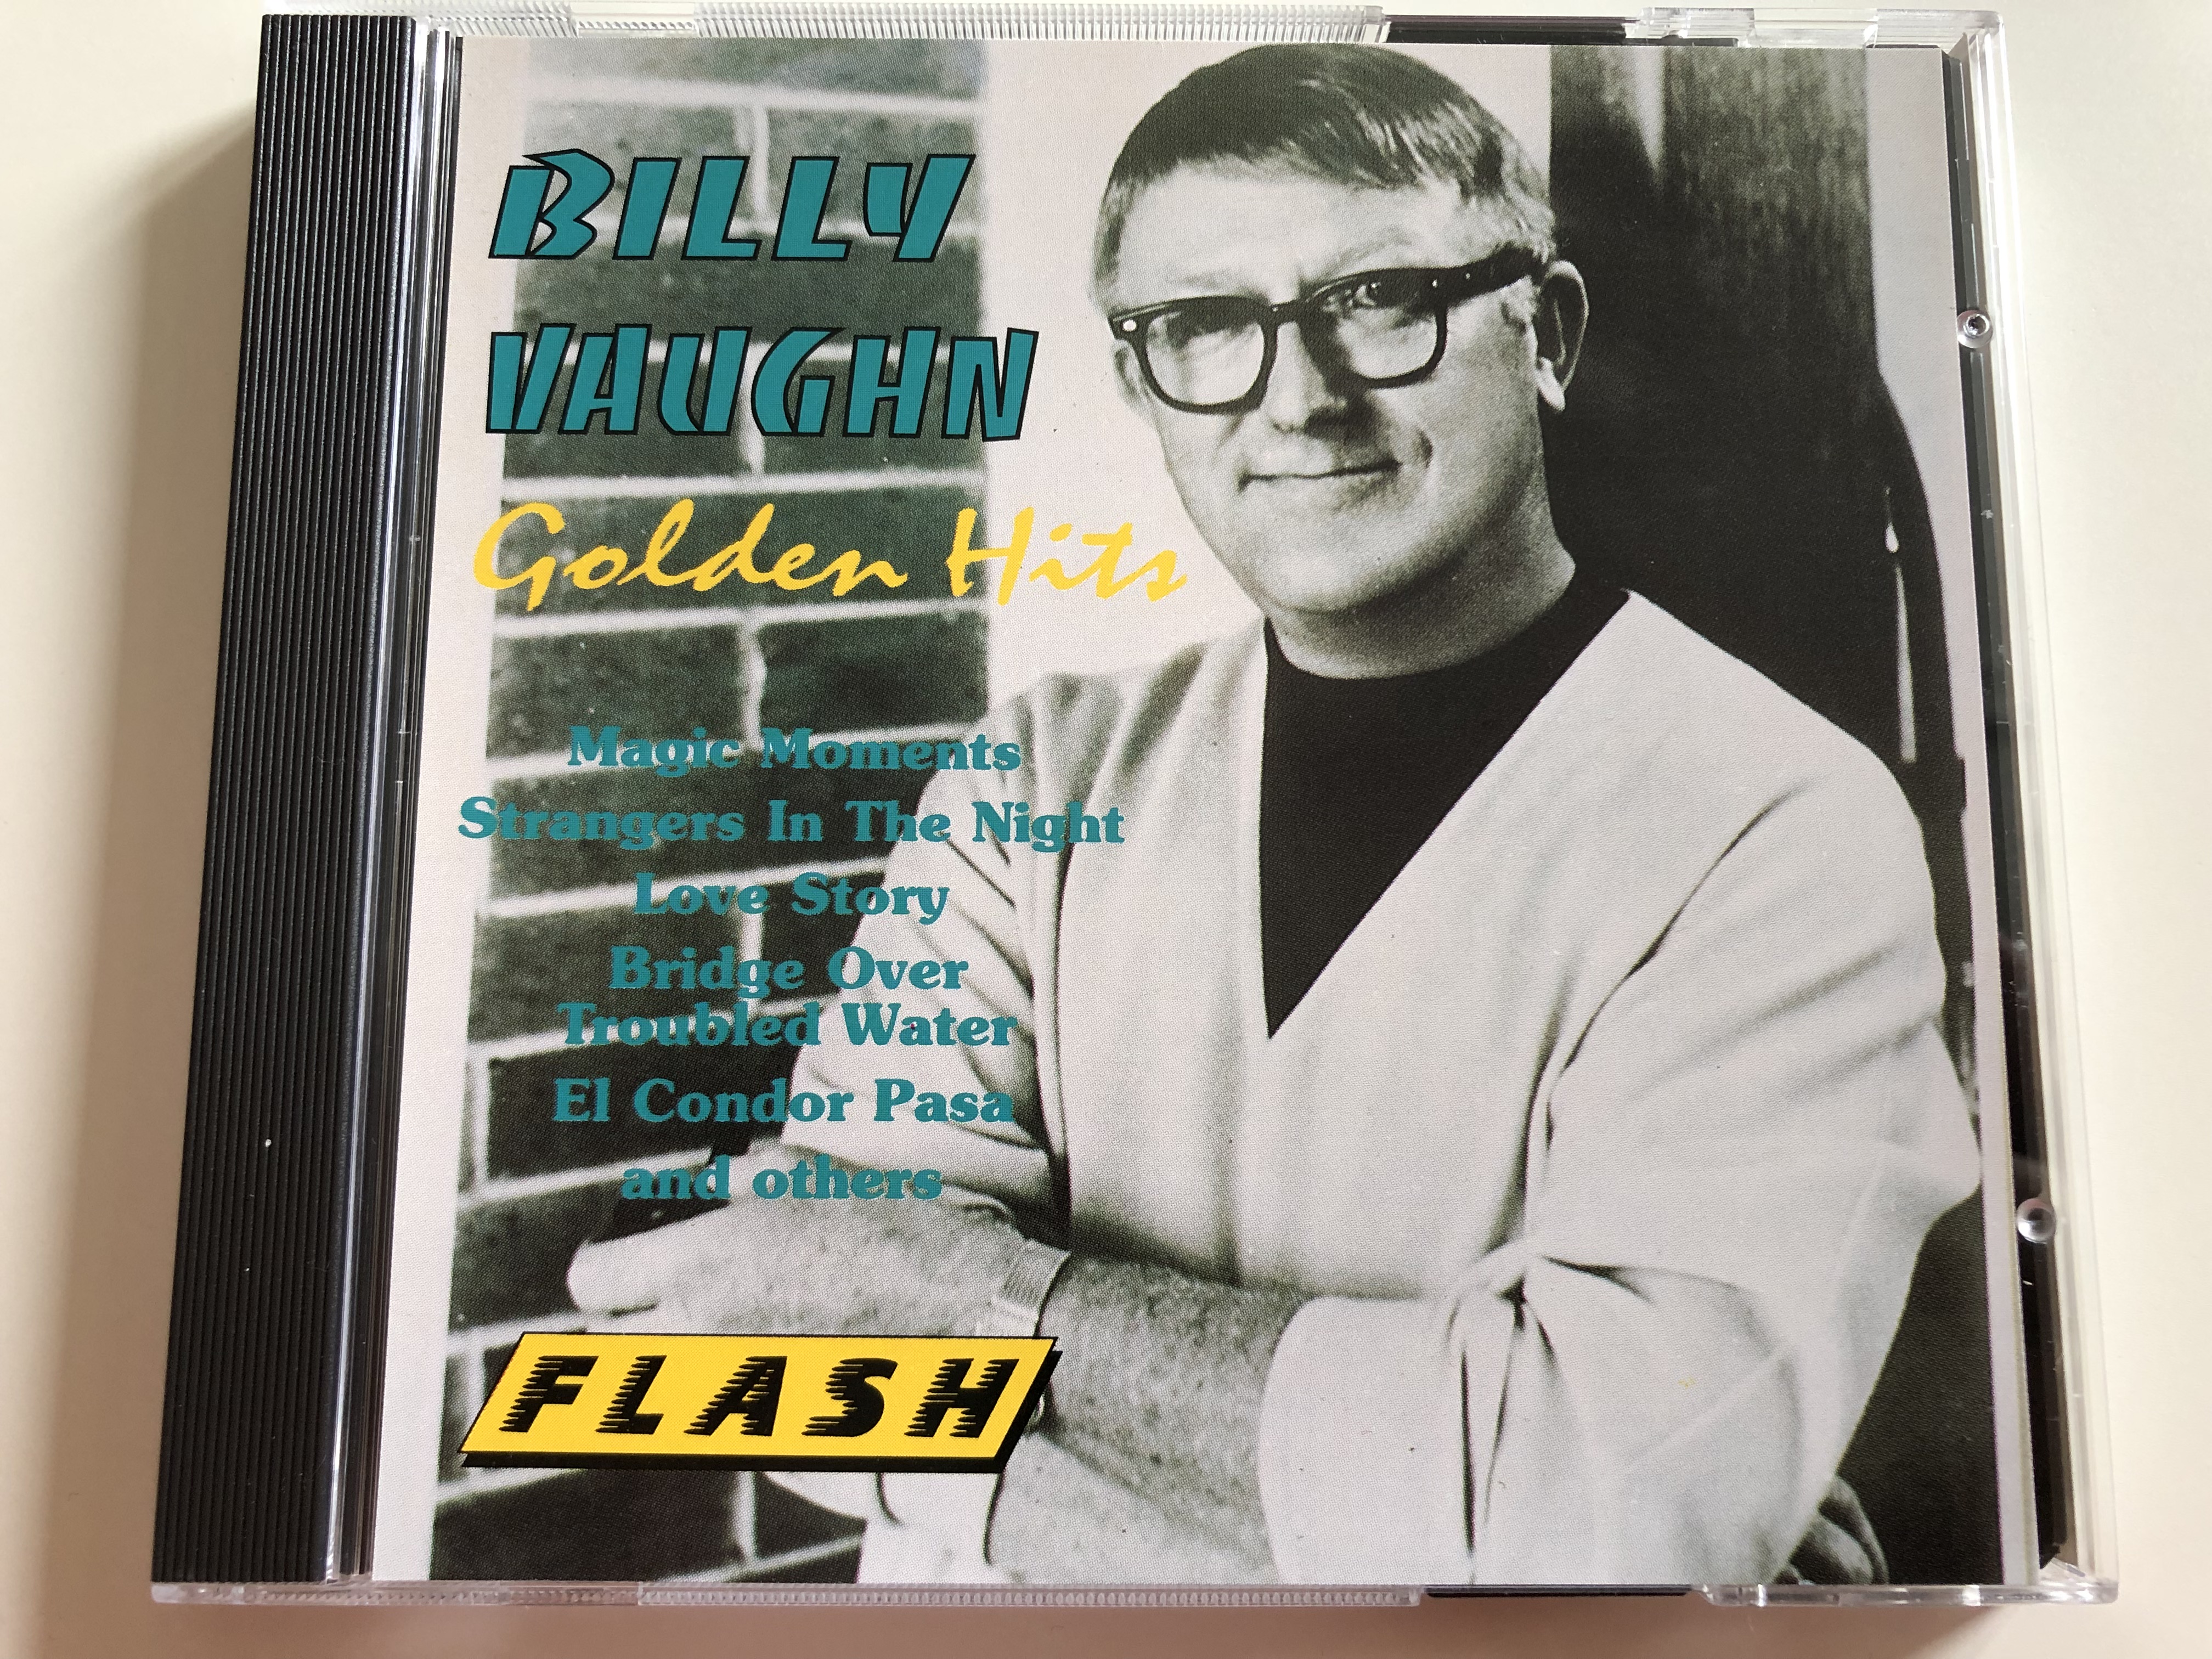 billy-vaughn-golden-hits-magic-moments-strangers-in-the-night-love-story-bridge-over-troubled-water-el-condor-pasa-and-others-flash-audio-cd-1989-stereo-f-8232-2-8323-2-1-.jpg